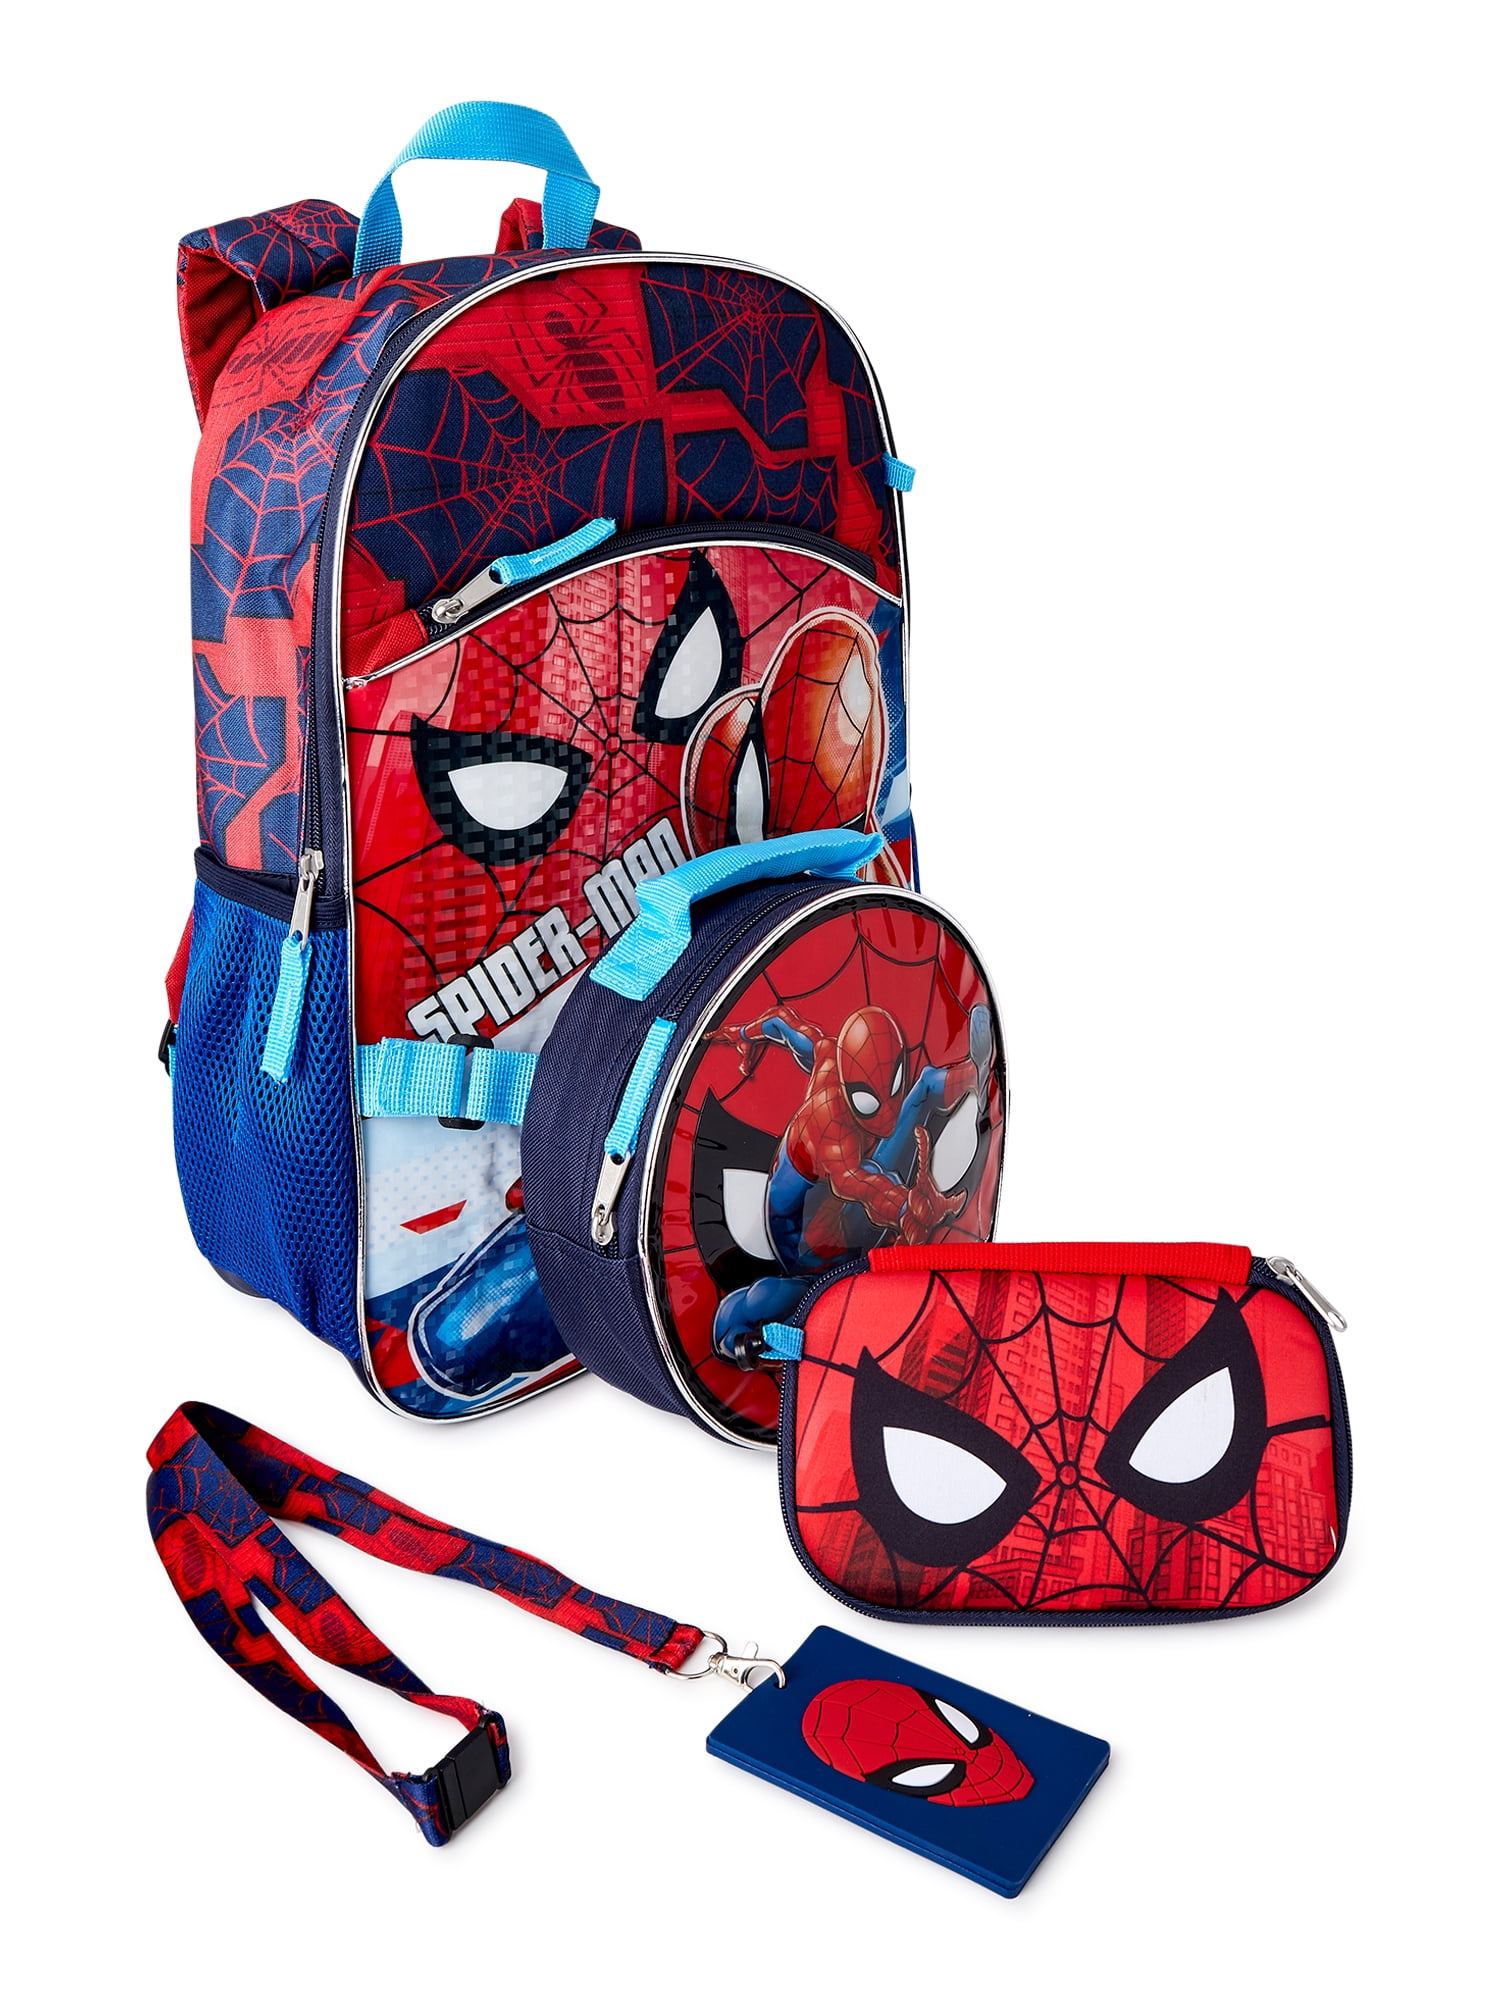 Marvel Spiderman 15" Backpack with Lunch Snack Box Set Free Pencilcase Deal 